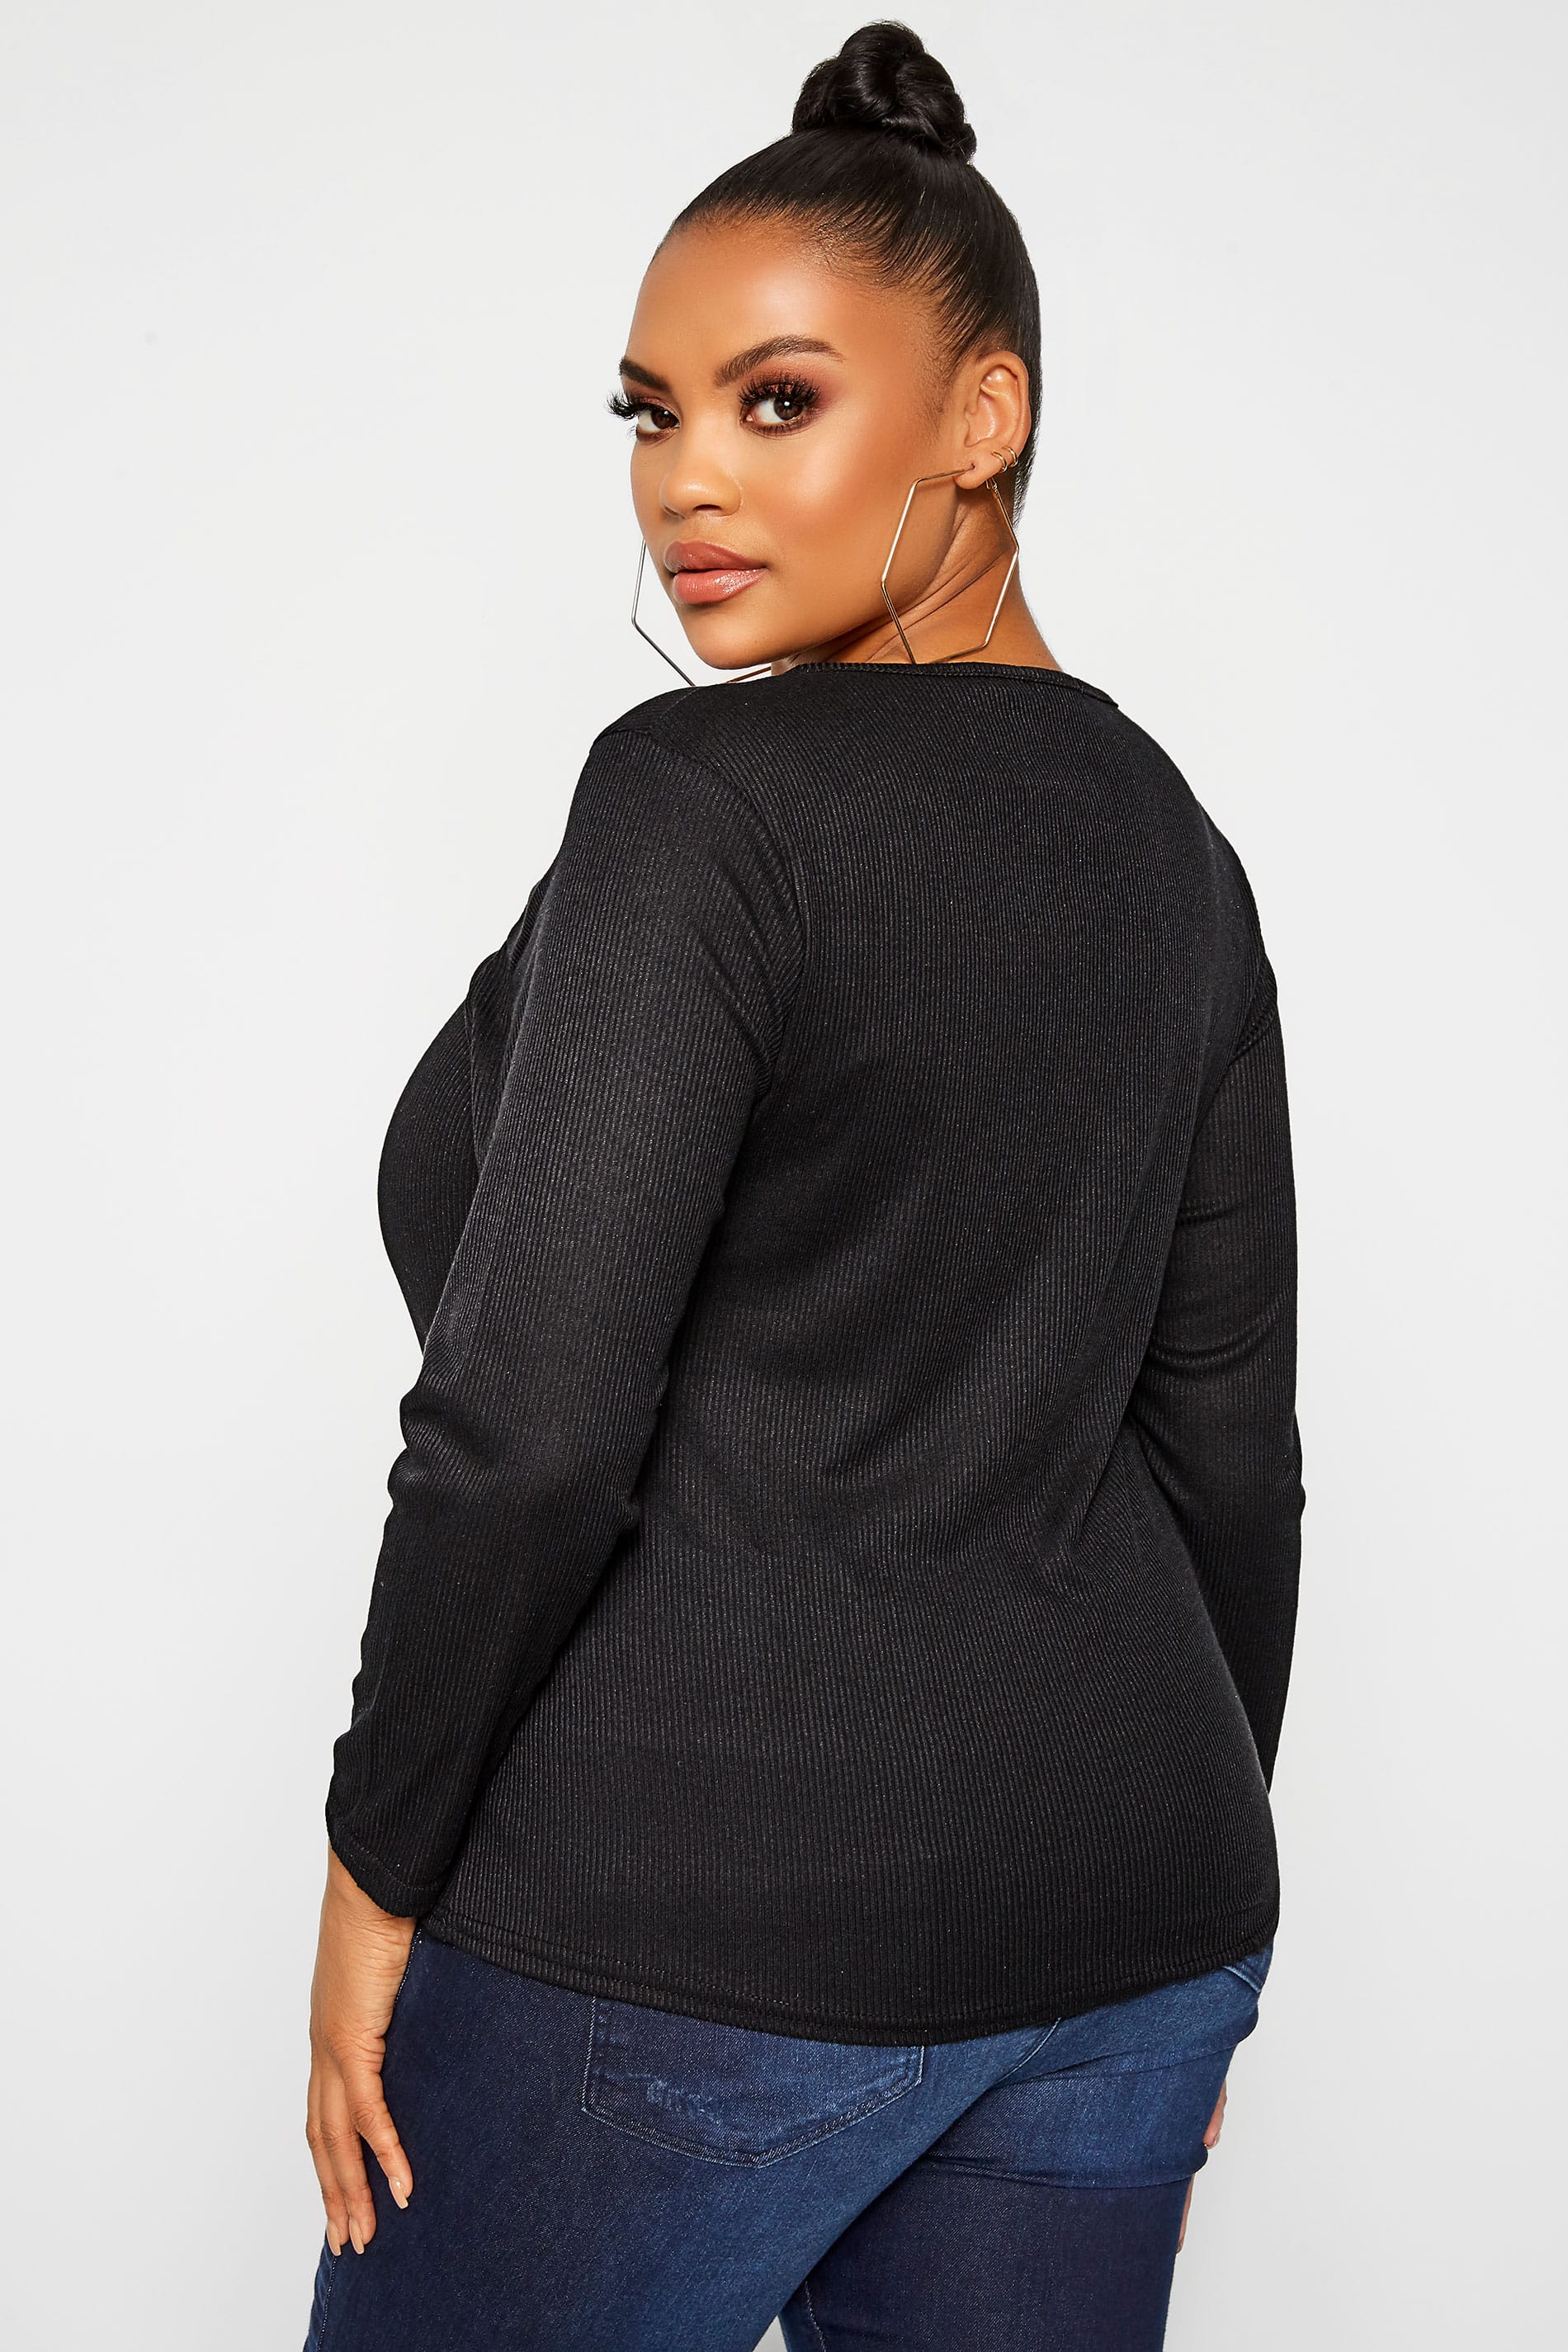 LIMITED COLLECTION Black Ribbed Wrap Top | Yours Clothing